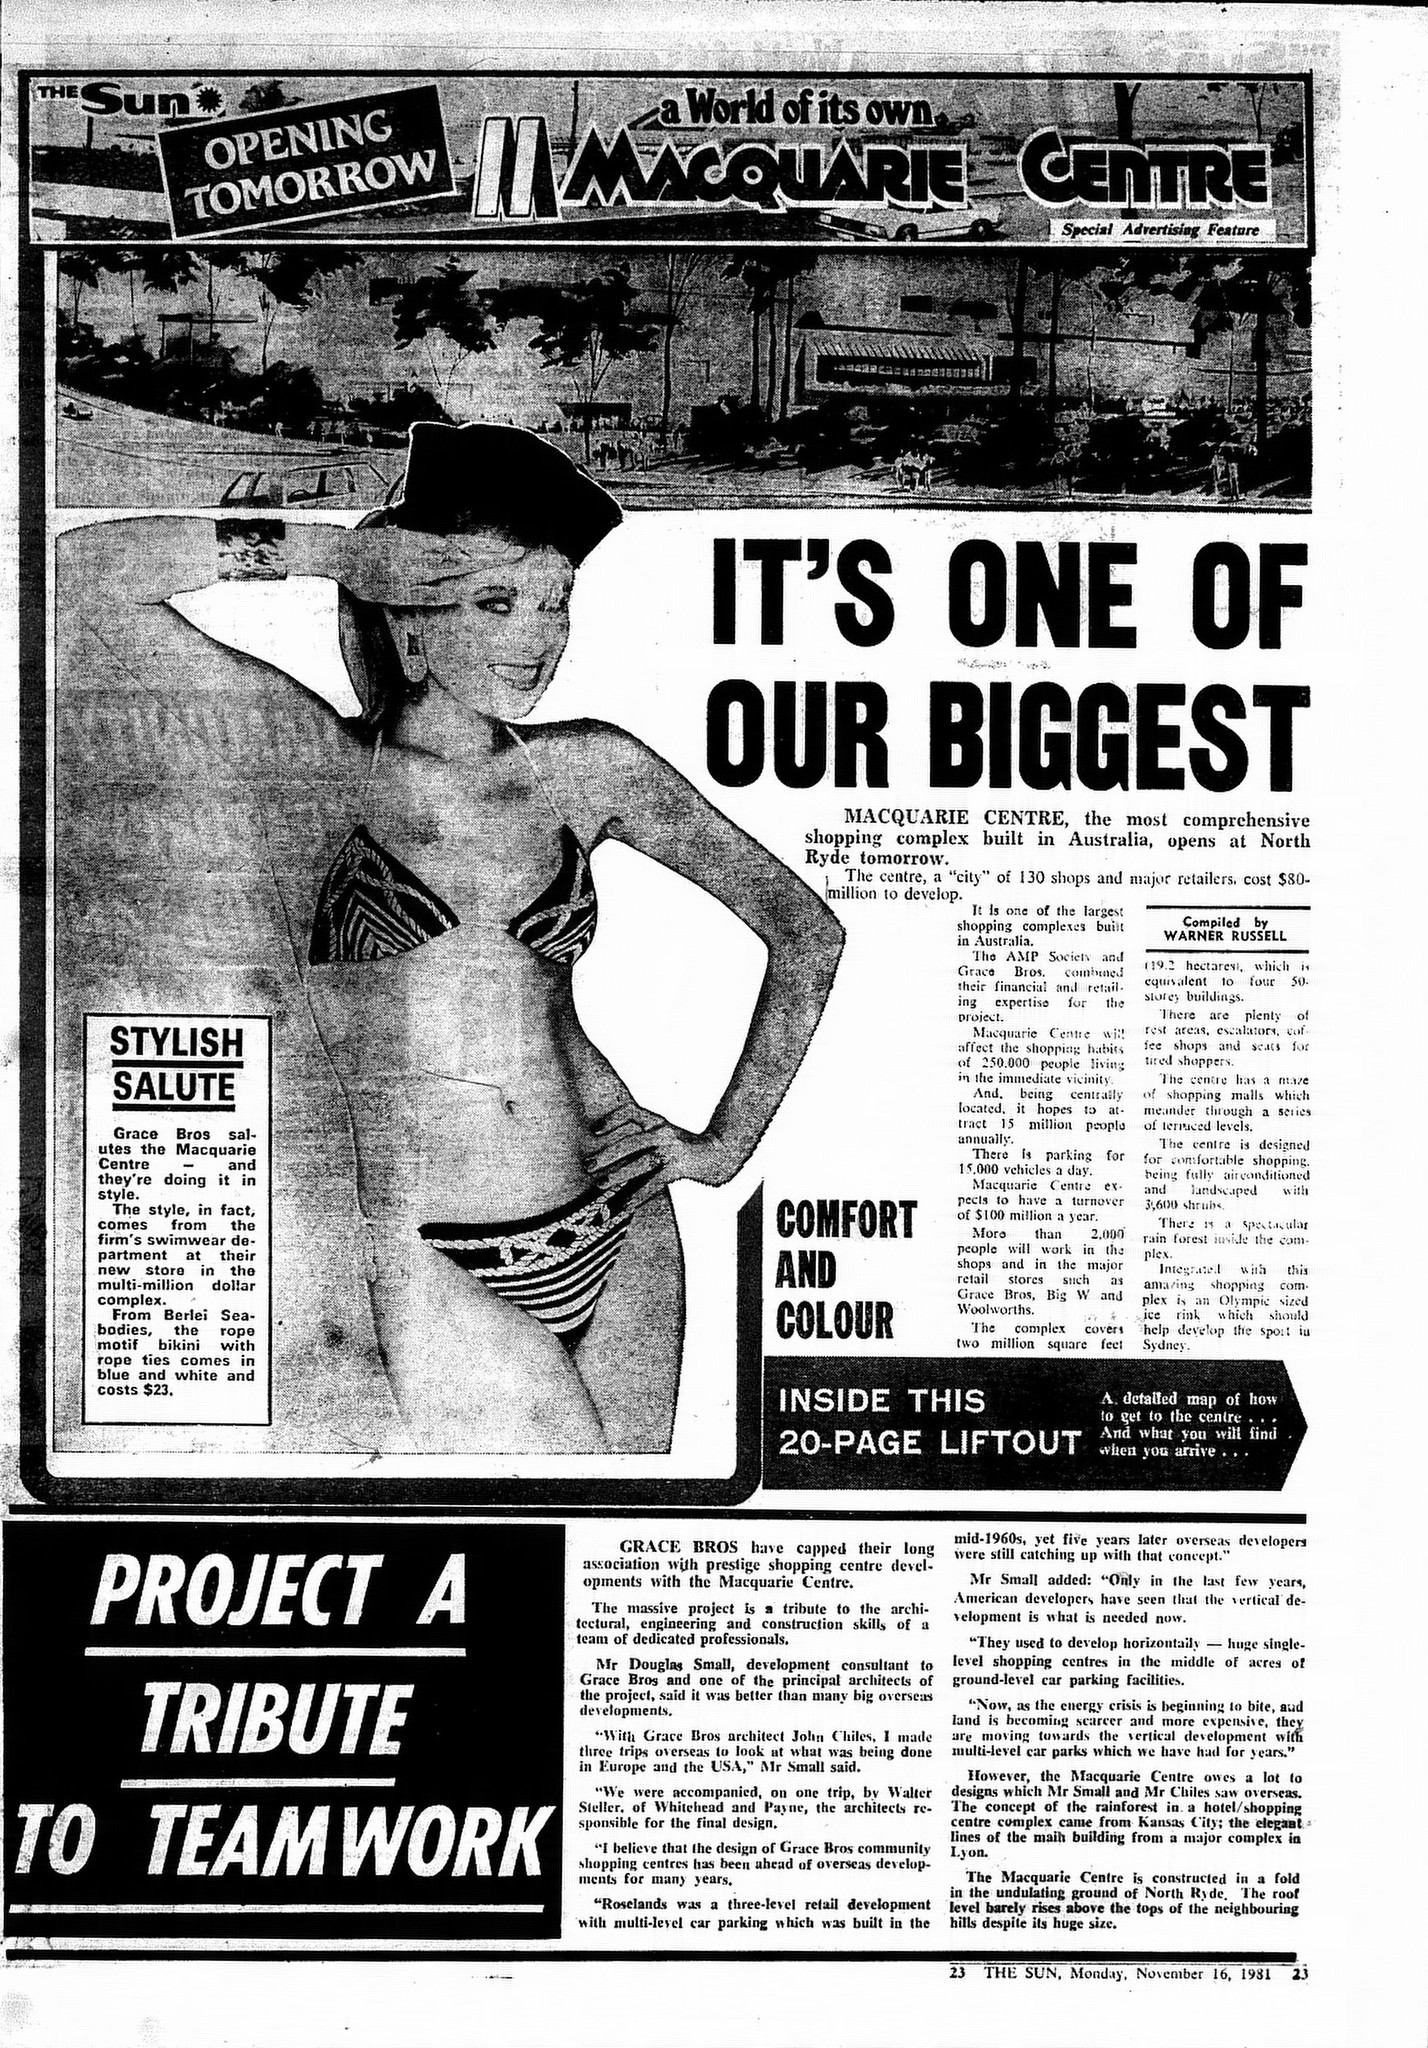 Macquarie Centre Opening Supplement November 16 1981 The Sun (1)